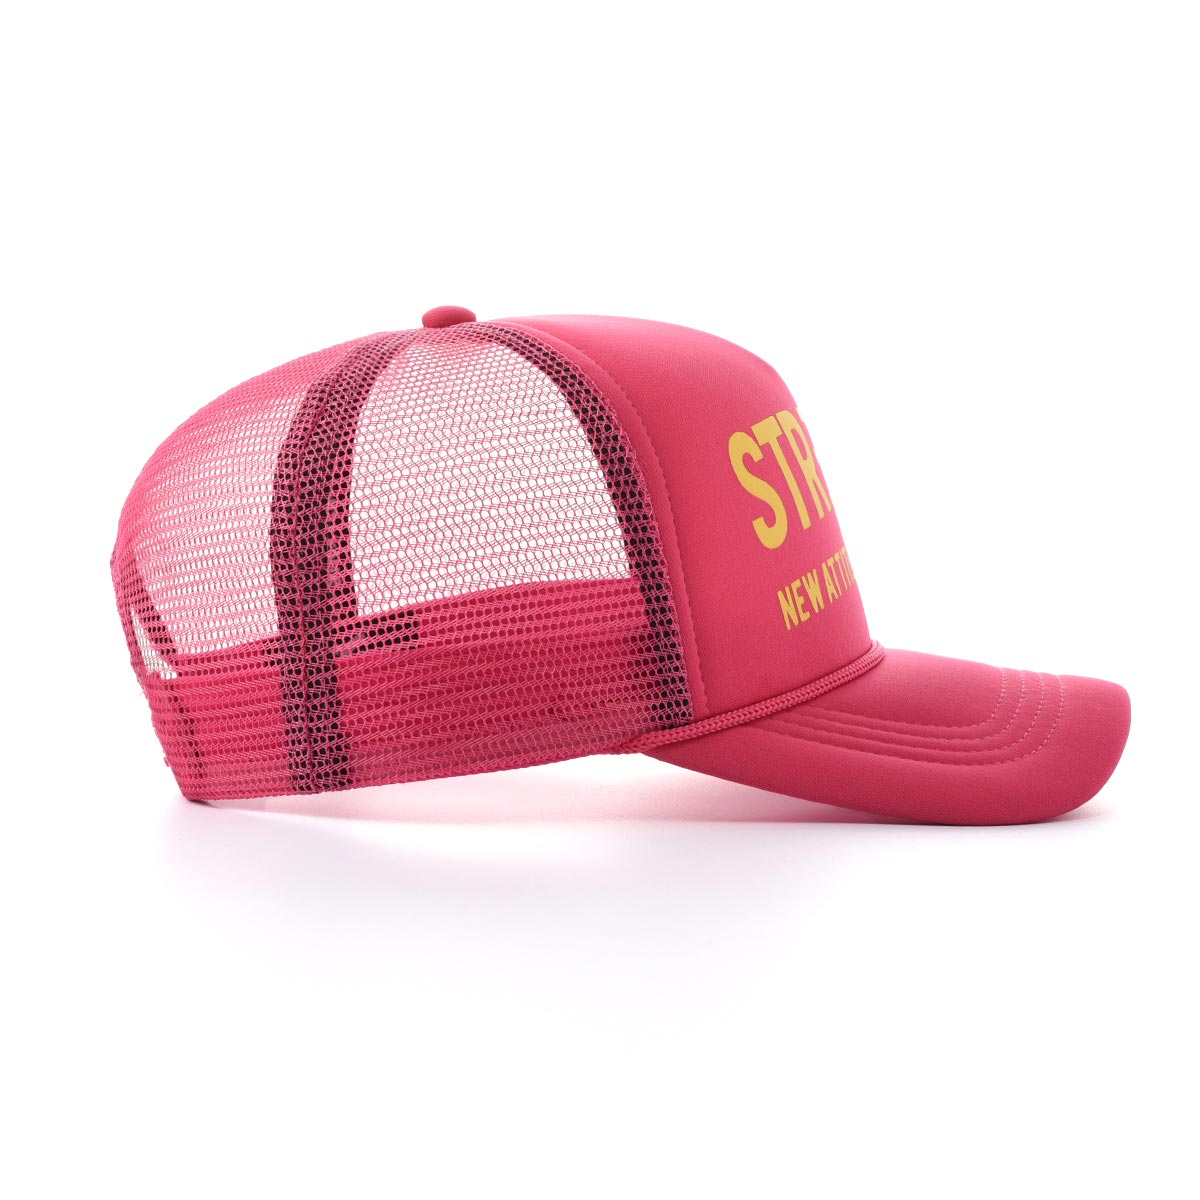 Streeter unisex foam trucker hat for women and men at the horizontal view SFA-210430-1